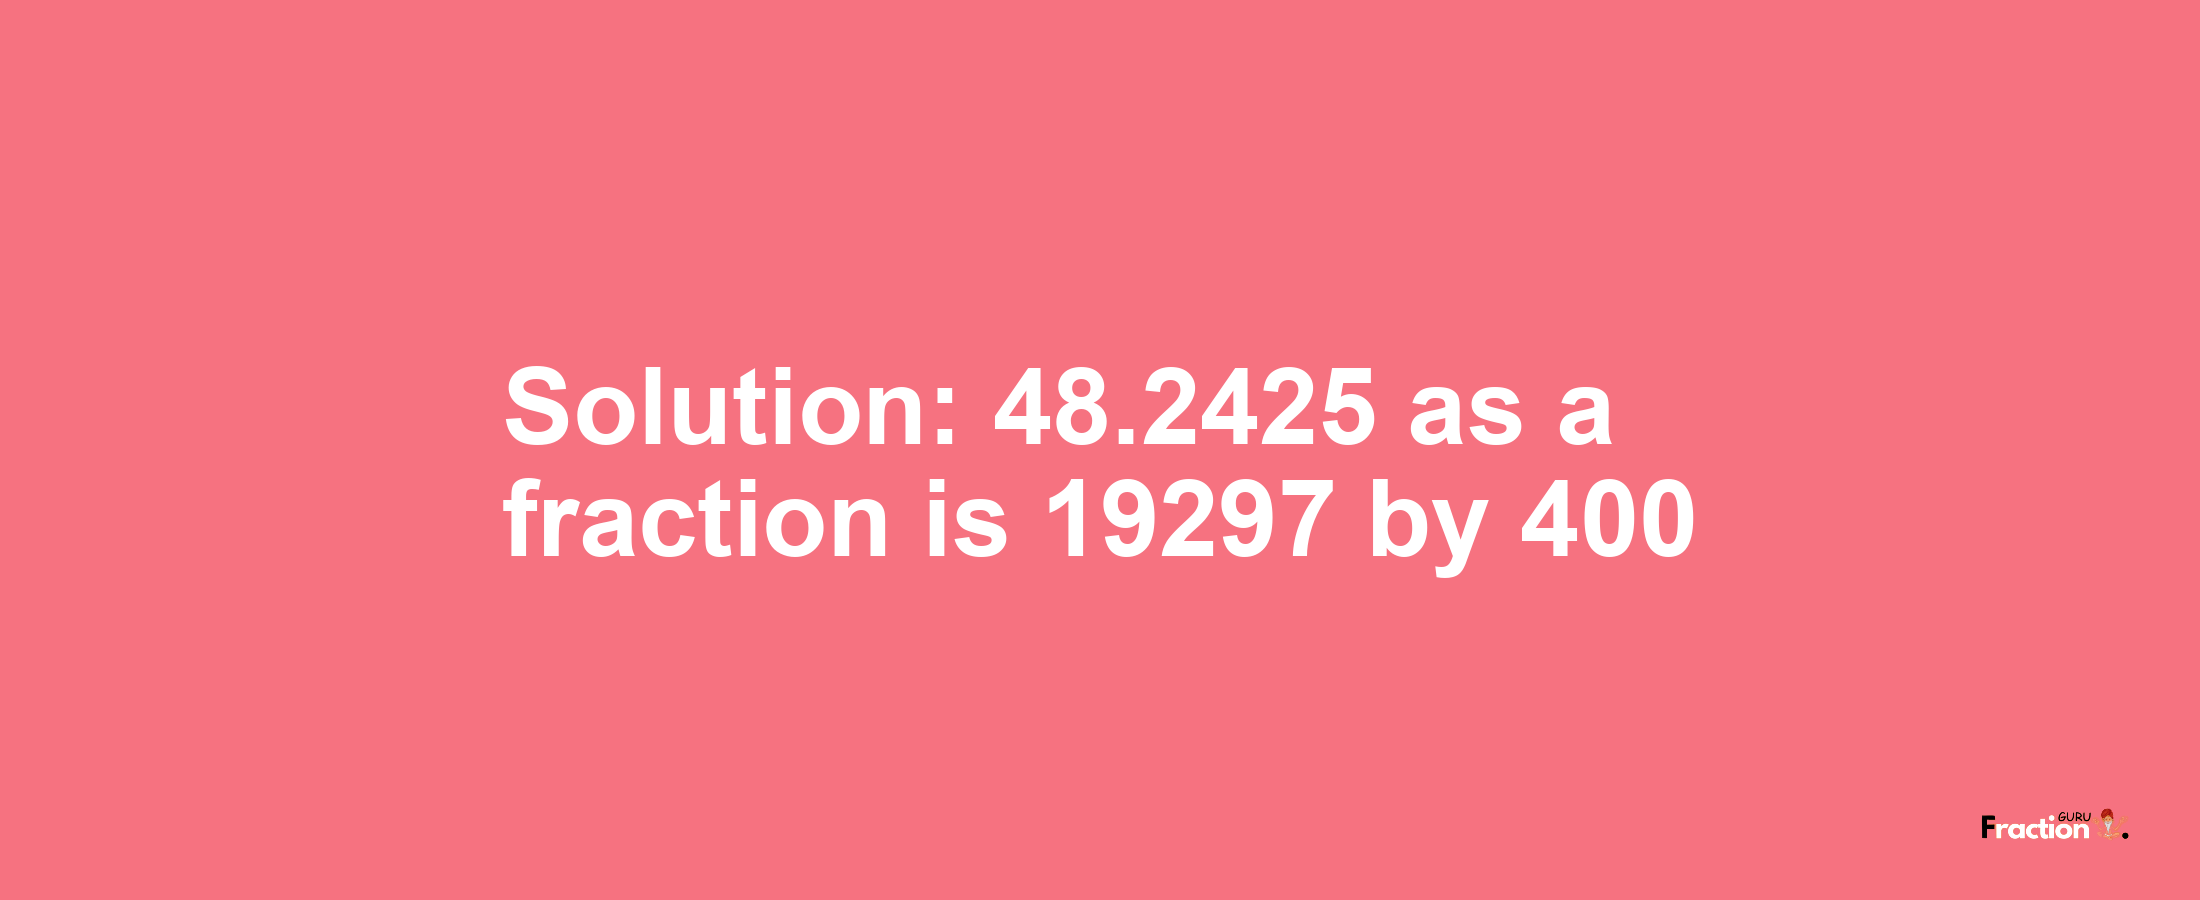 Solution:48.2425 as a fraction is 19297/400